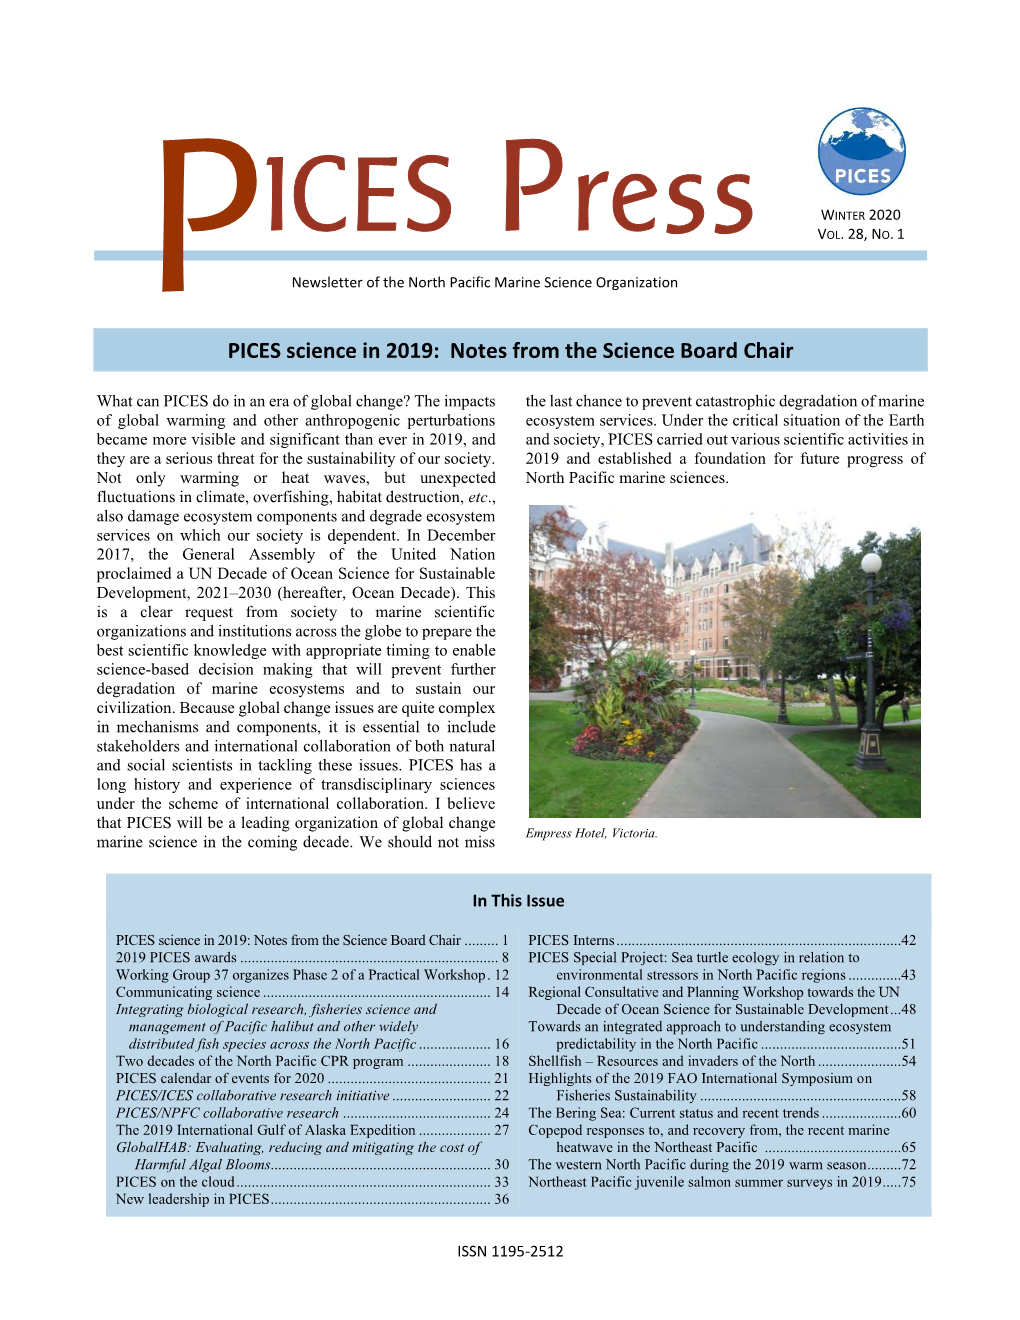 PICES Science in 2019: Notes from the Science Board Chair